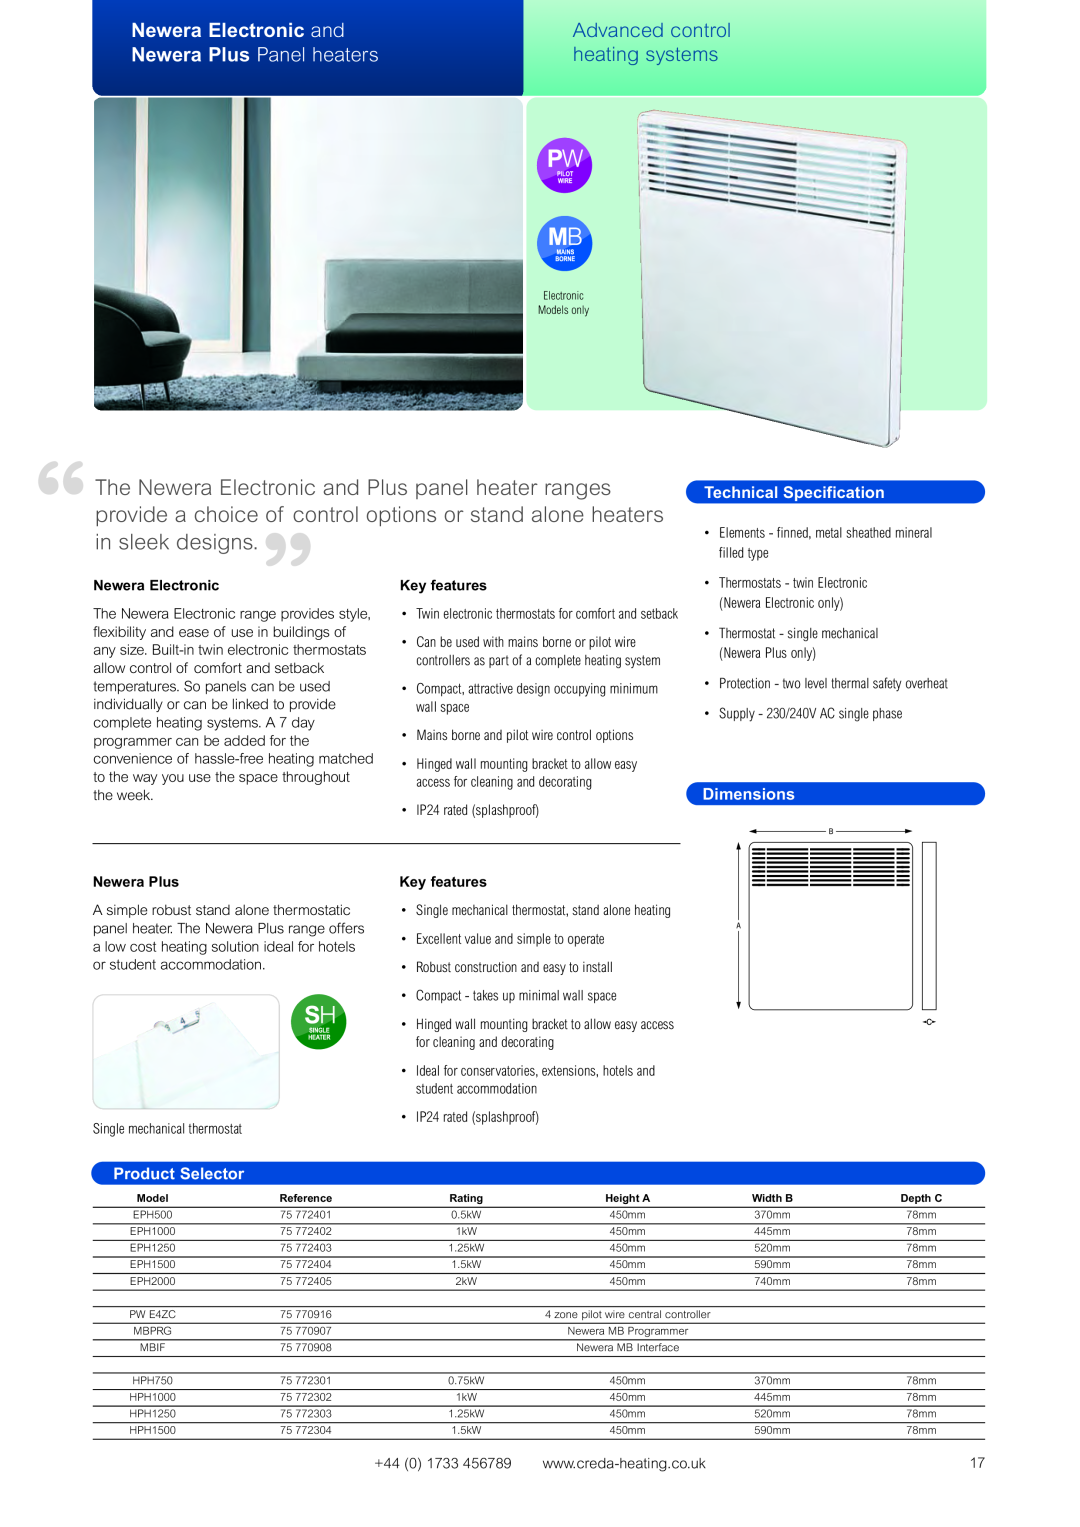 Creda Advanced Control Heating Systems “in sleek designs, Newera Electronic and, Newera Plus Panel heaters, Dimensions 